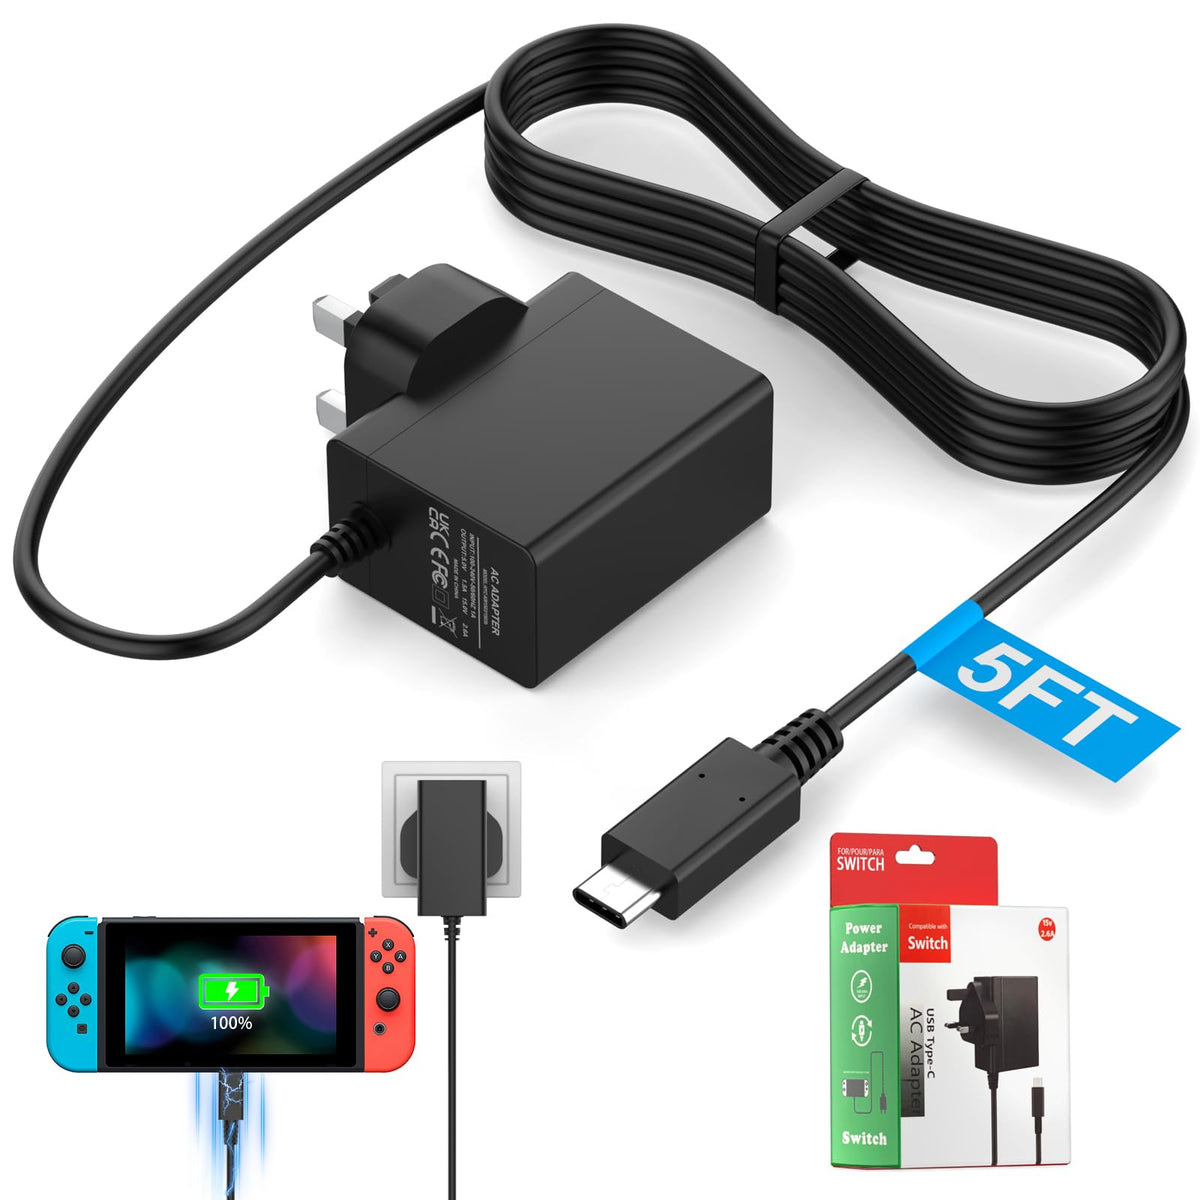 for Nintendo Switch Charger Cable Ac Power Adapter for Switch lite, Dock, OLED, Pro Controller UK Plug 15V 2.6A Fast Charging Support TV Mode